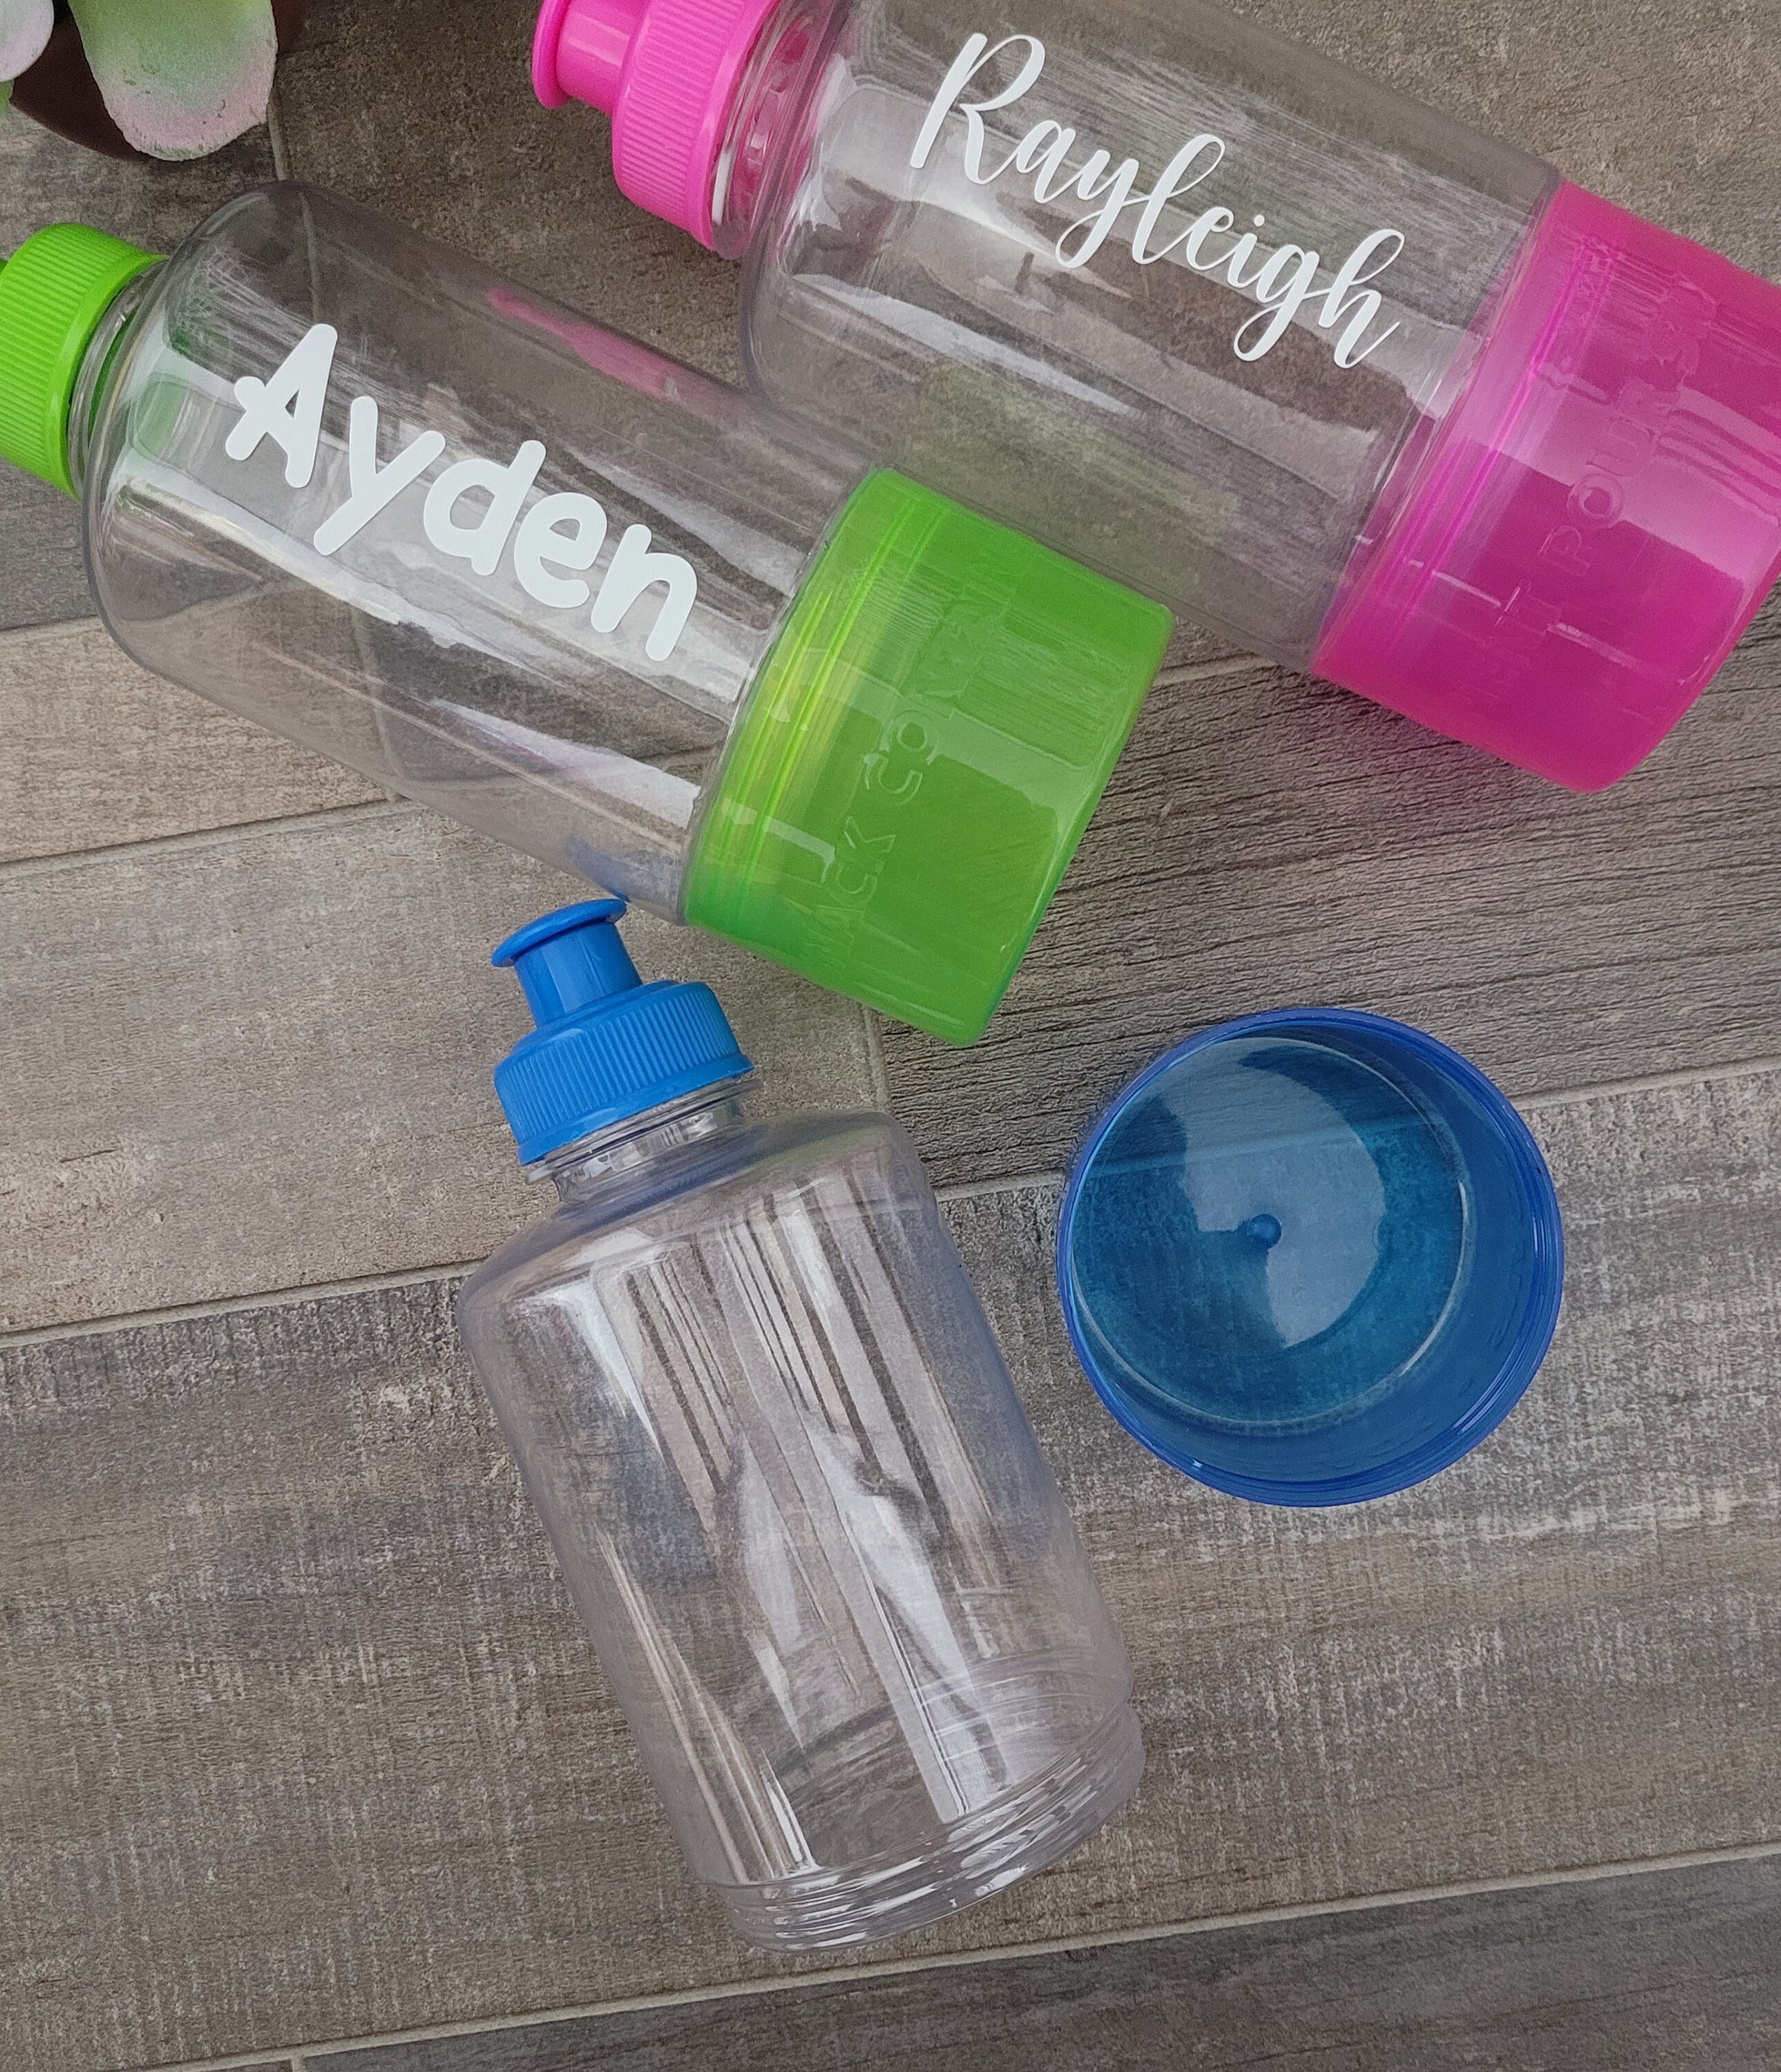 Kid's Snack Water Bottle / Kid's Water Bottle / Snack Compartment Cup /  Personalized Snack Bottle / Monogramed Snack Bottle / Snack & Go Cup 